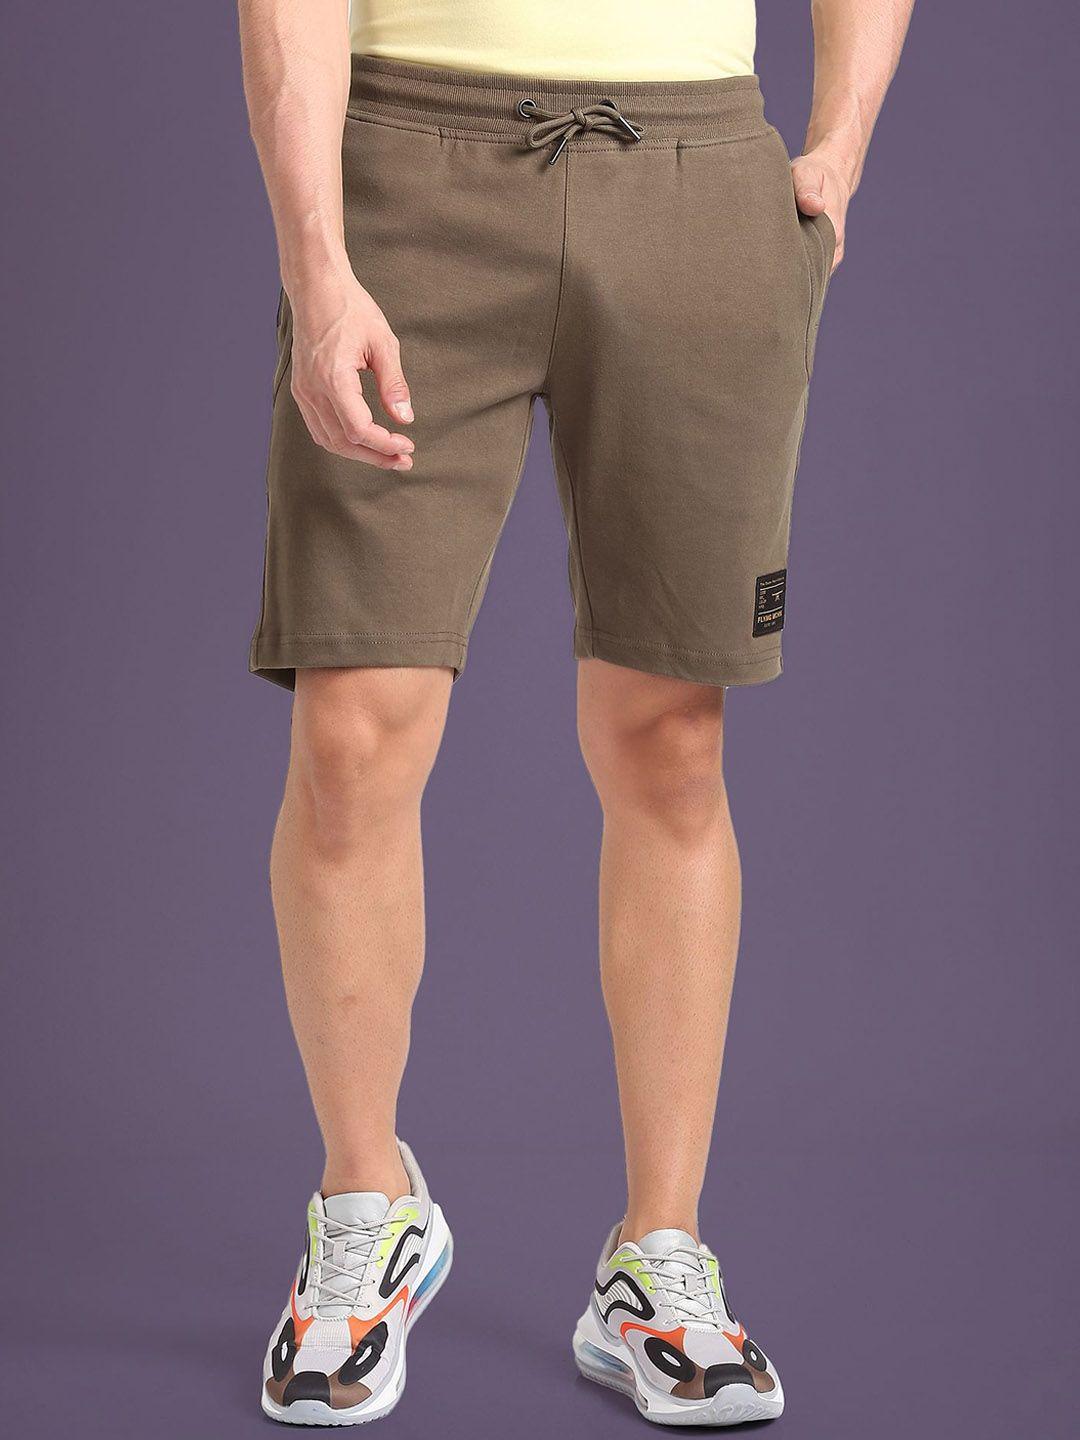 flying machine men mid-rise casual cotton shorts